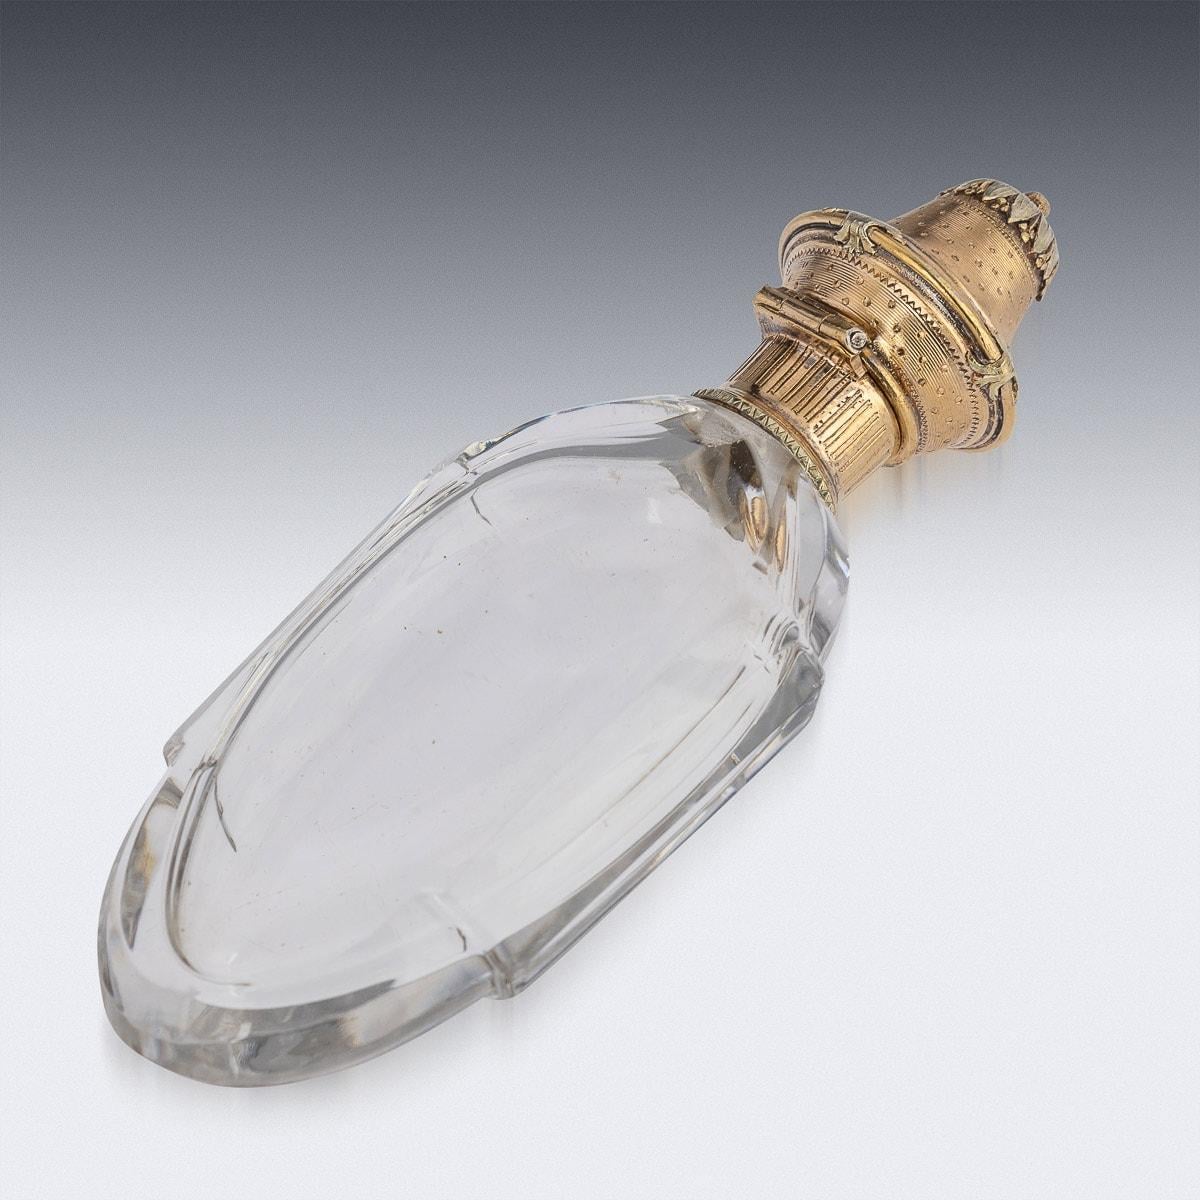 Antique mid-19th Century French 18k gold mounted perfume bottle, lozenge shaped glass body set with a gold collar and hinged lid engraved with engine turning and scrolling foliage. Apparently unmarked (tested 750 standard, used 1838 - present),